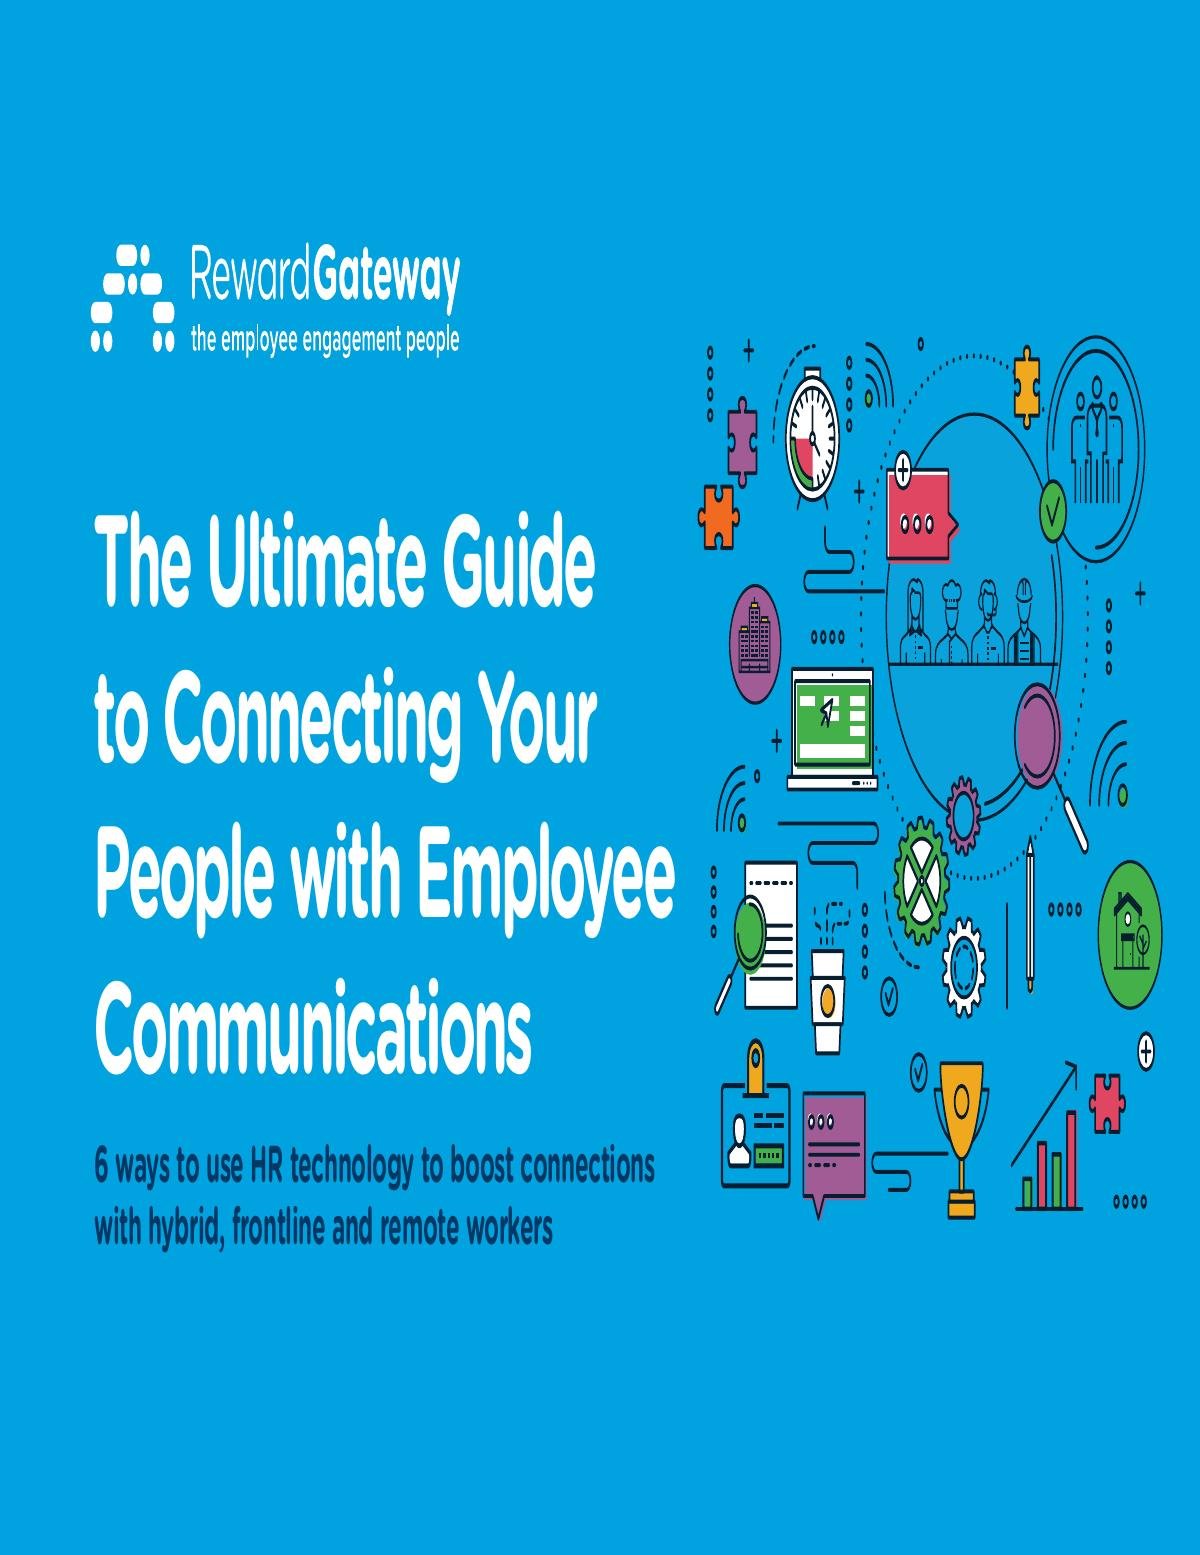 The Ultimate Guide to Connecting Your People with Employee Communications